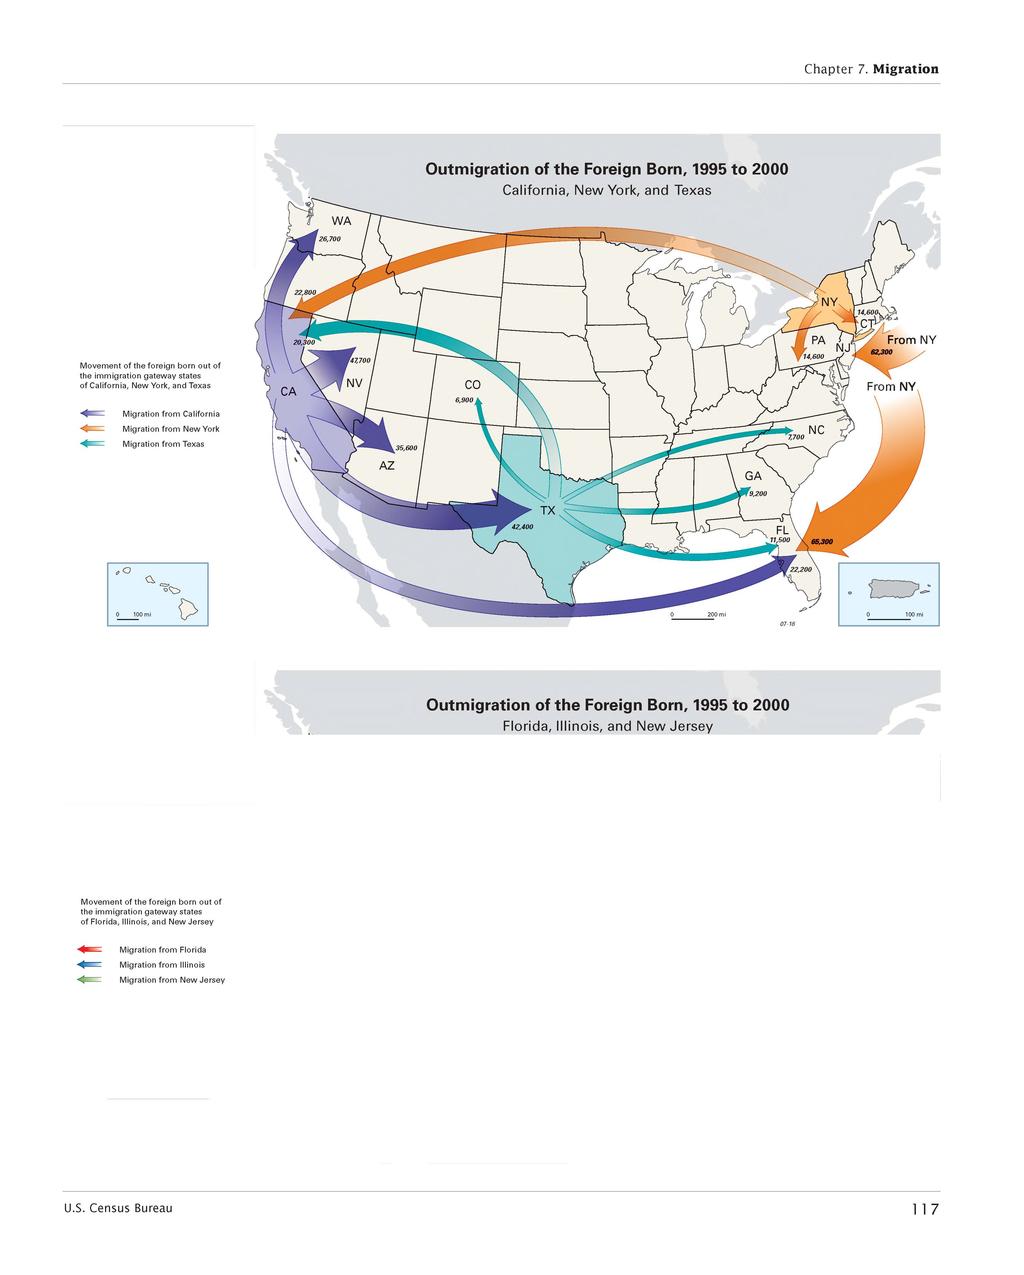 Outmigration of the Foreign Bom, 1995 to 2000 California, New York, and Texas 26,700 WA NY M ovem ent of the foreign